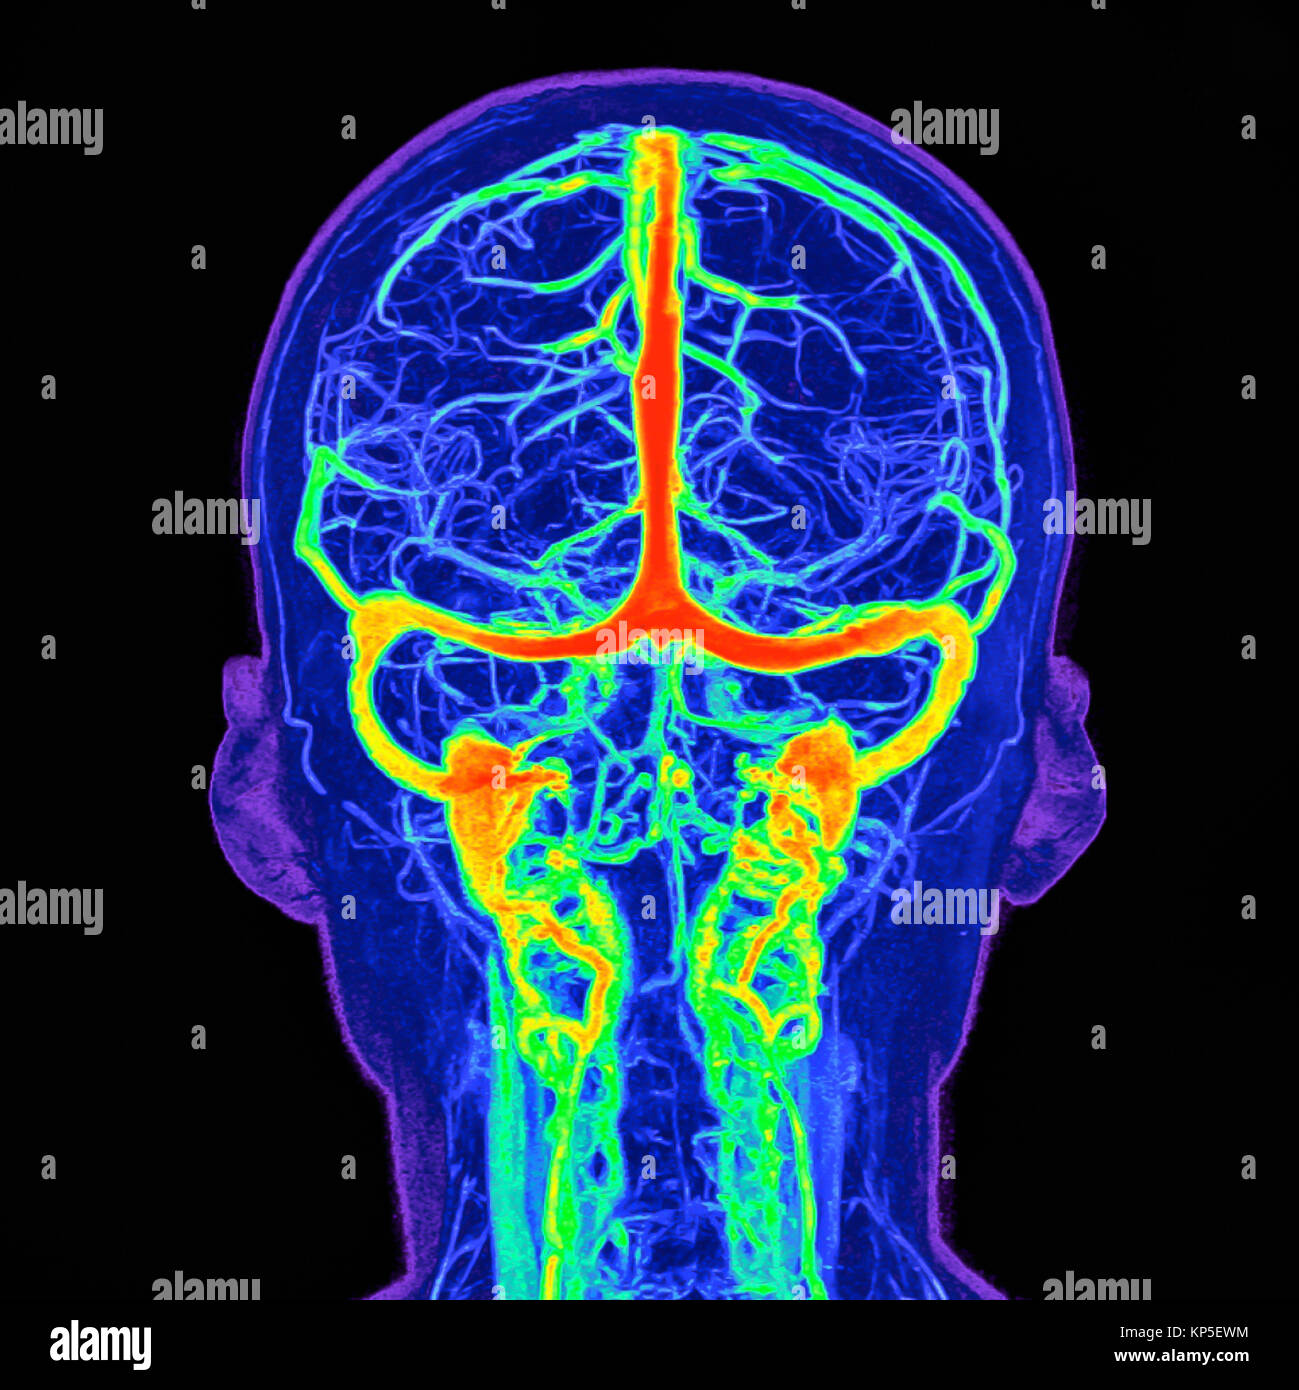 Intracranial blood vessels, Illustration based on a coloured magnetic resonance imaging (MRI) scan of a human brain and its intracranial blood vessels Stock Photo